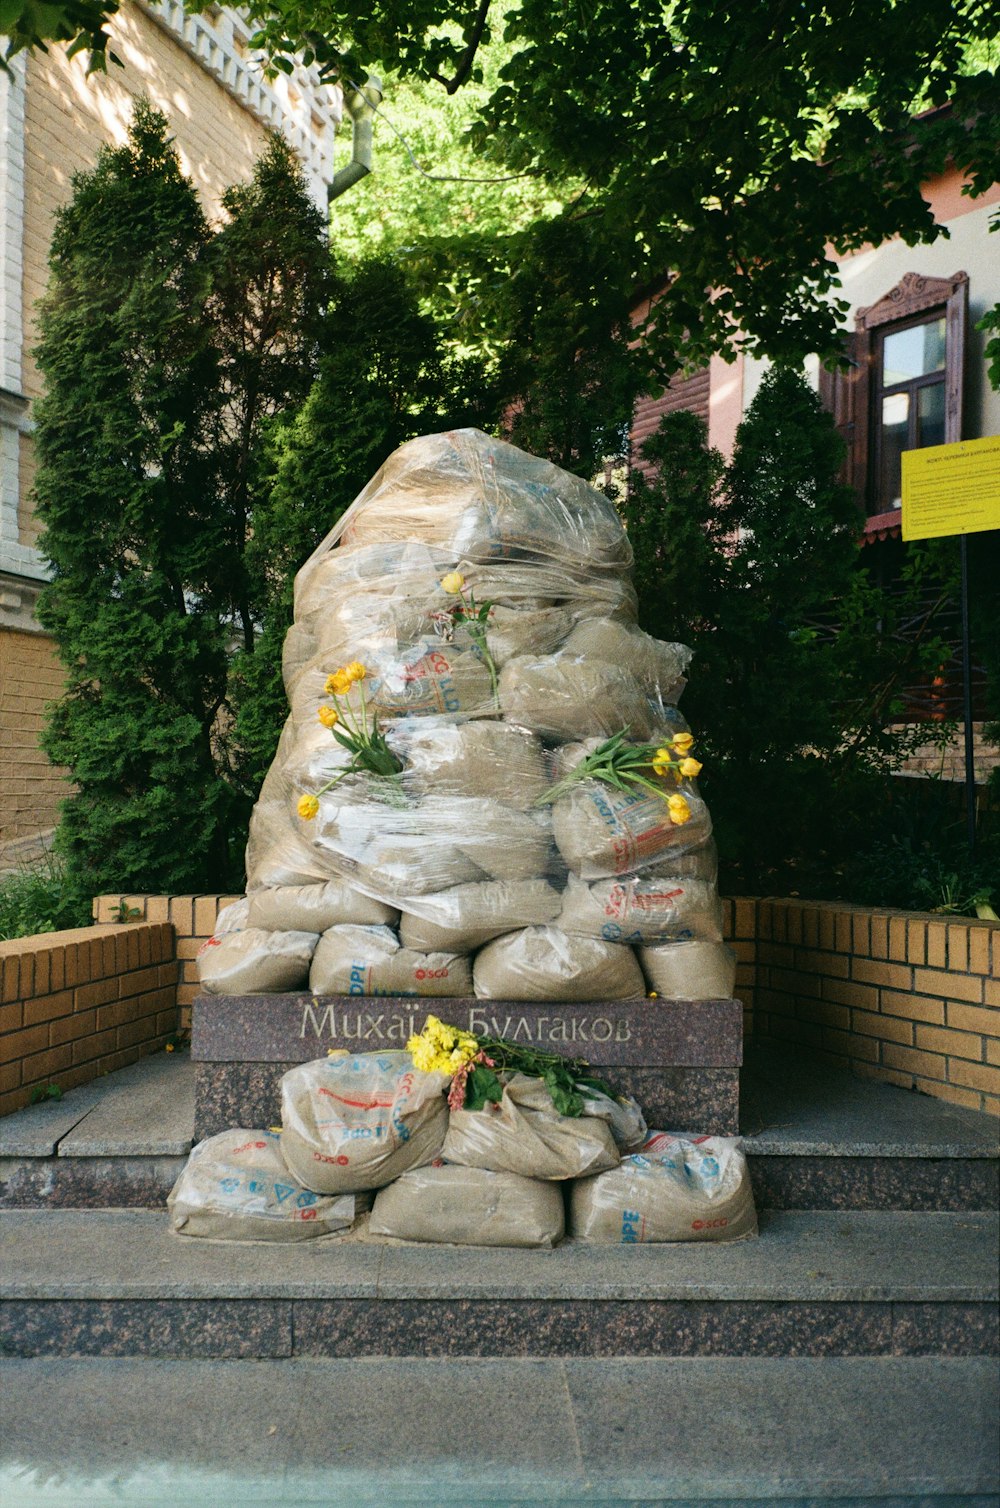 a statue of a person with flowers